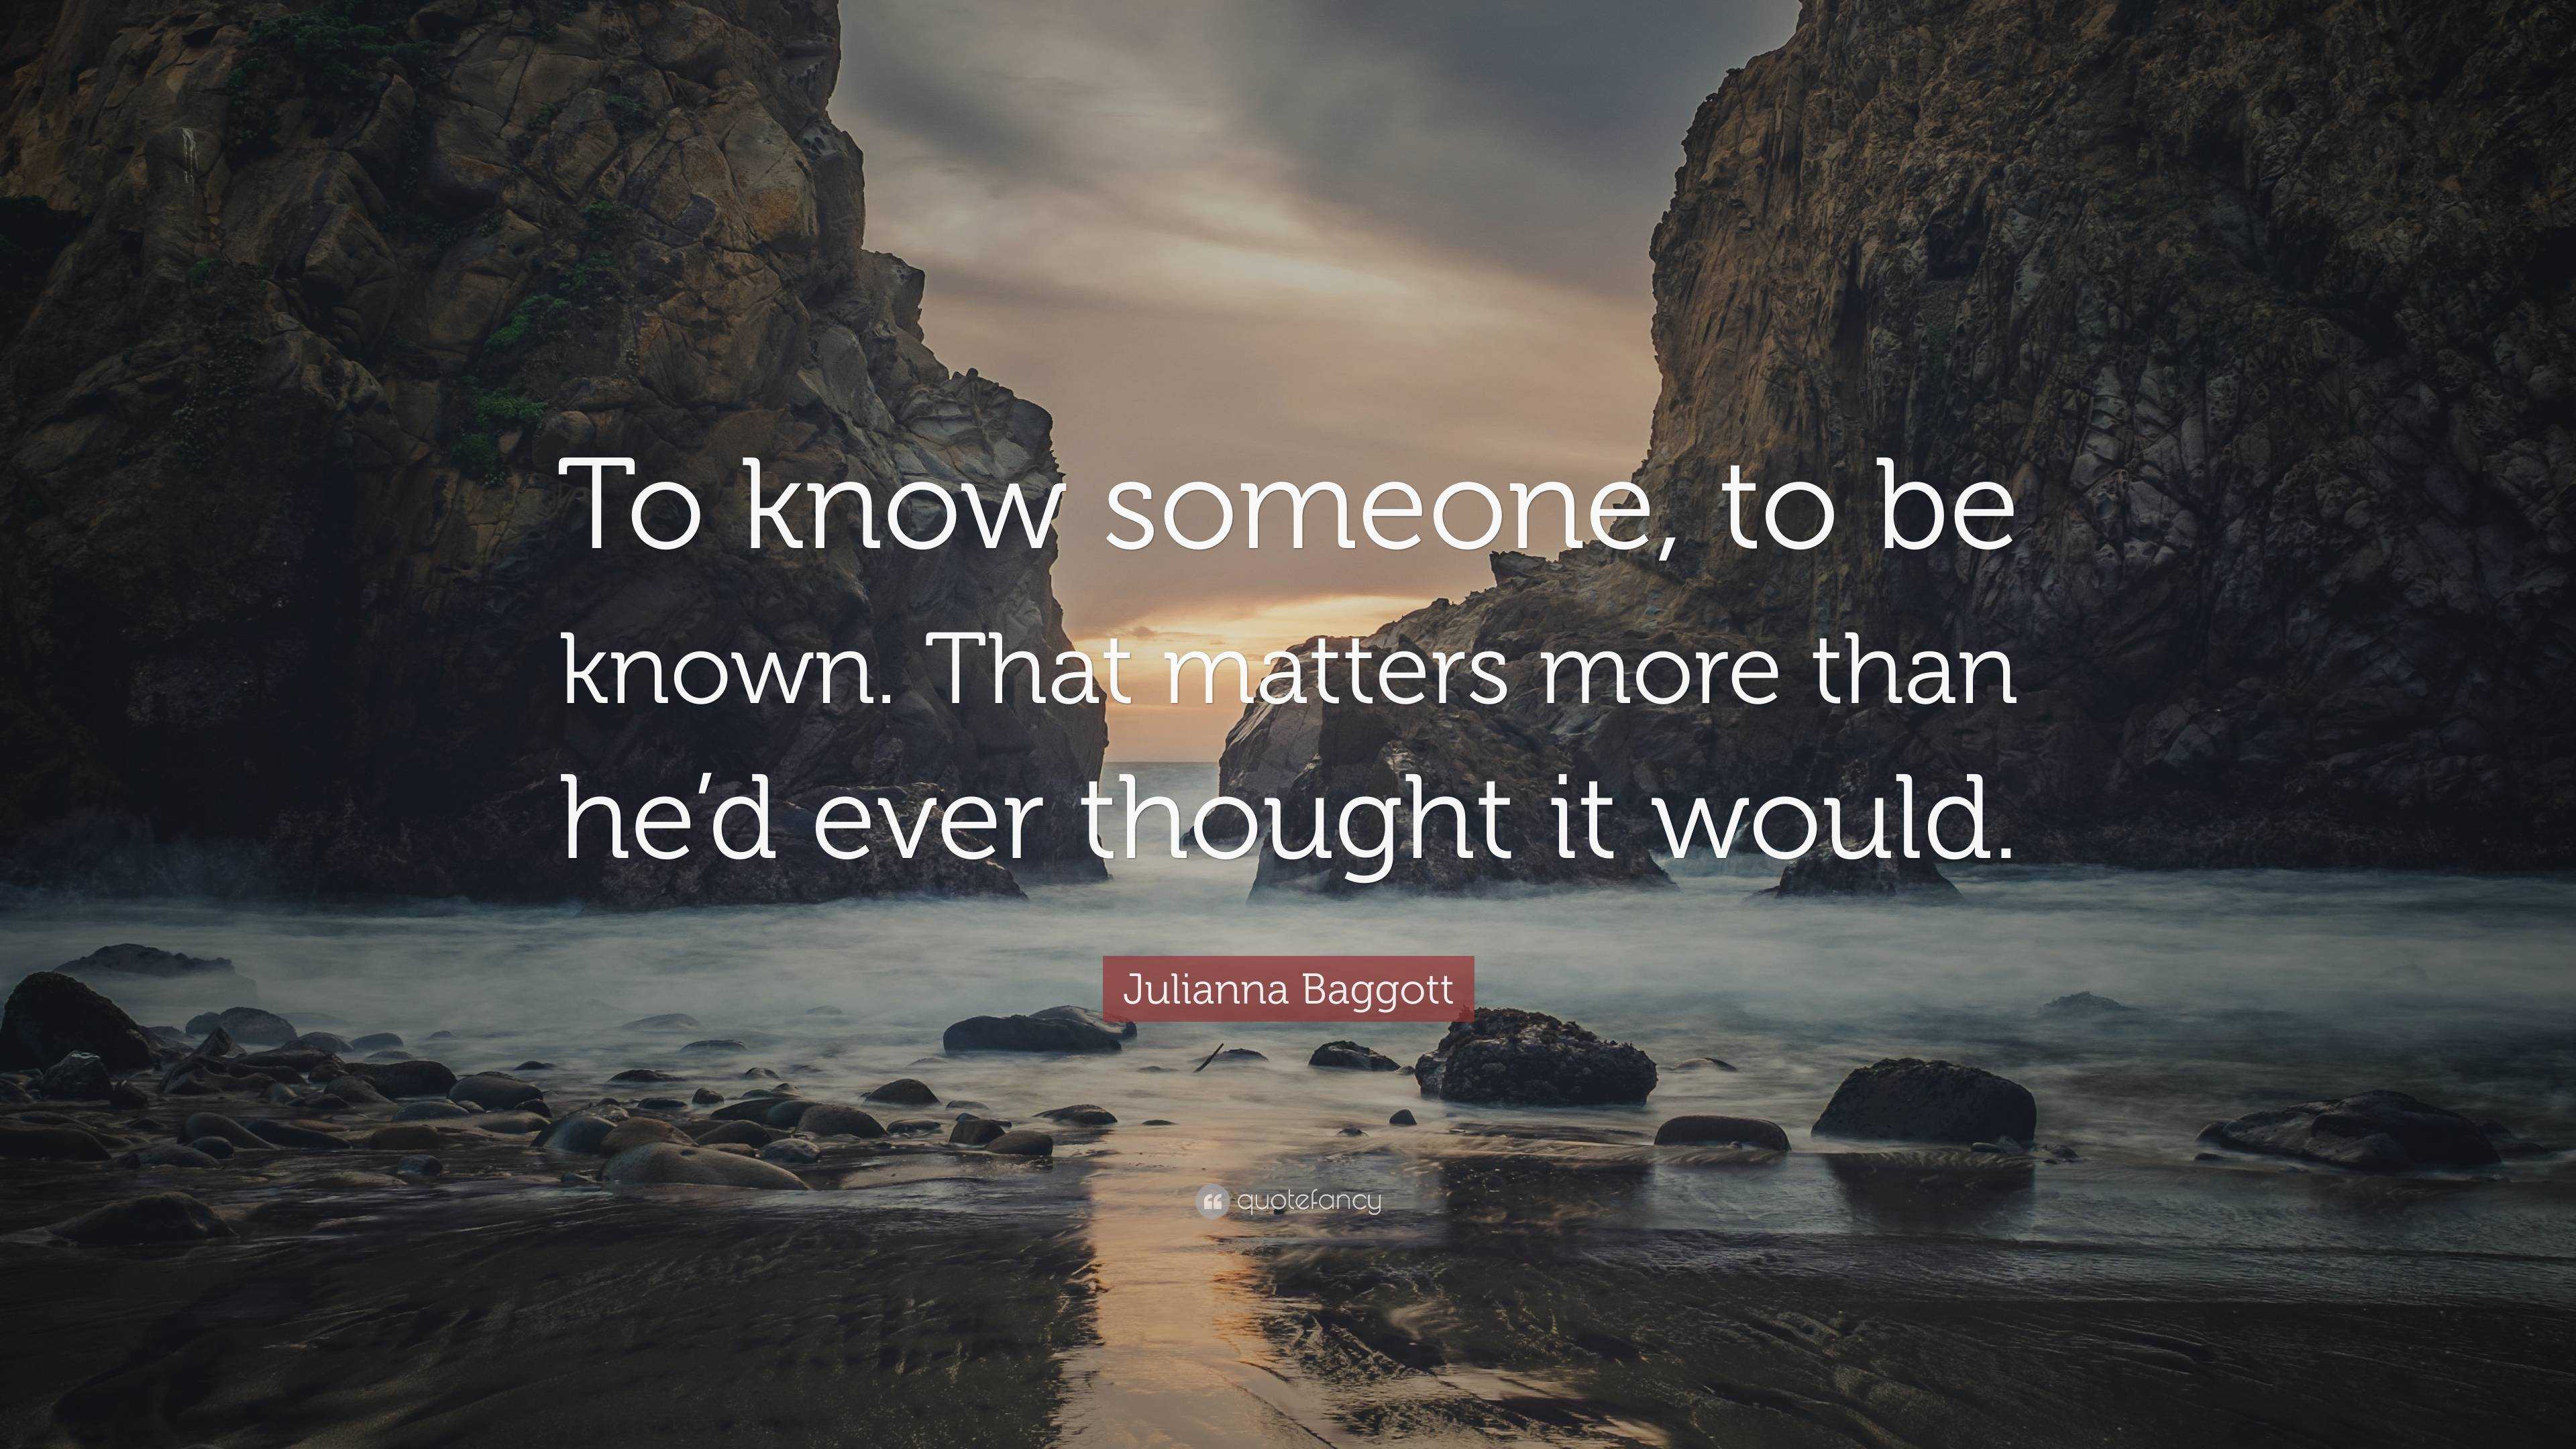 Julianna Baggott Quote: “To know someone, to be known. That matters ...